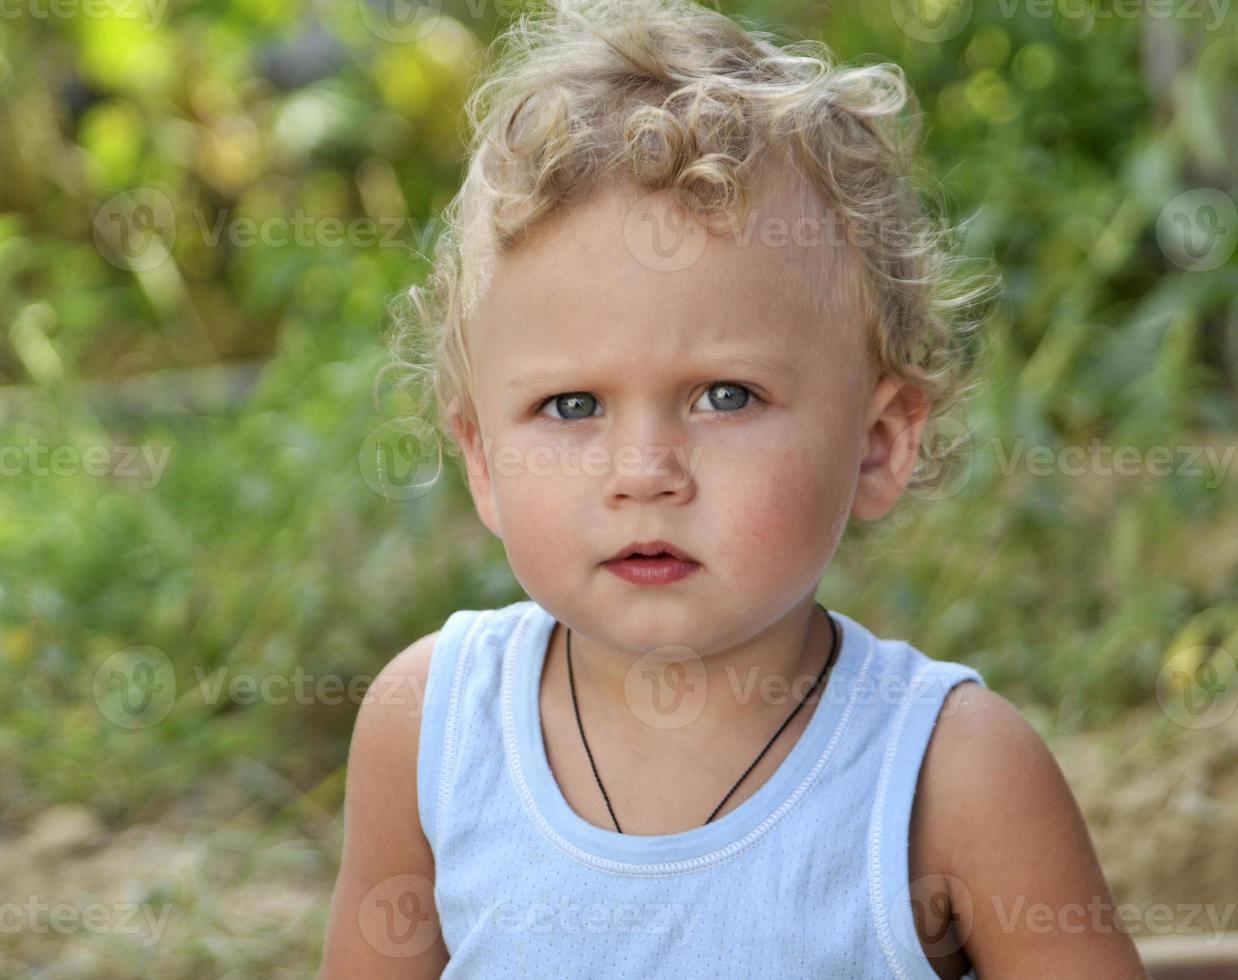 Beautiful baby boy with child face posing photographer for color photo